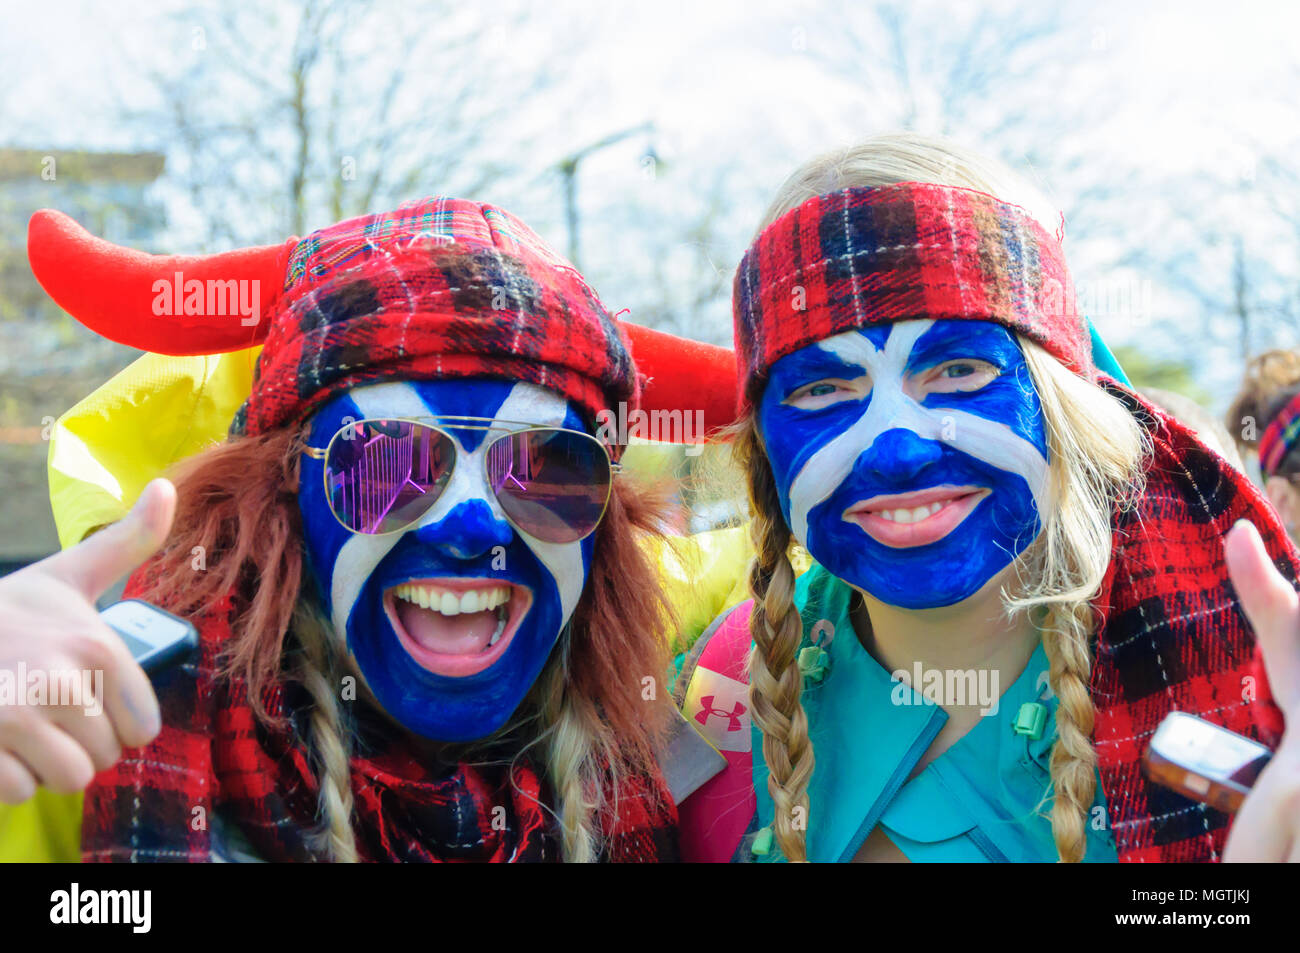 Glasgow, Scotland, UK. 29th April, 2018. Two smiling girls with the Scottish Flag painted onto their faces and wearing tartan headdresses at the start of the Kiltwalk Glasgow 2018, a charity event where walkers have three distances to choose from, a Mighty Stride (23 miles), a Big Stroll (14 miles) or the Wee Wander (6 miles). This year involved 10,000 walkers and raised two million pounds for 600 charities. Credit: Skully/Alamy Live News Stock Photo